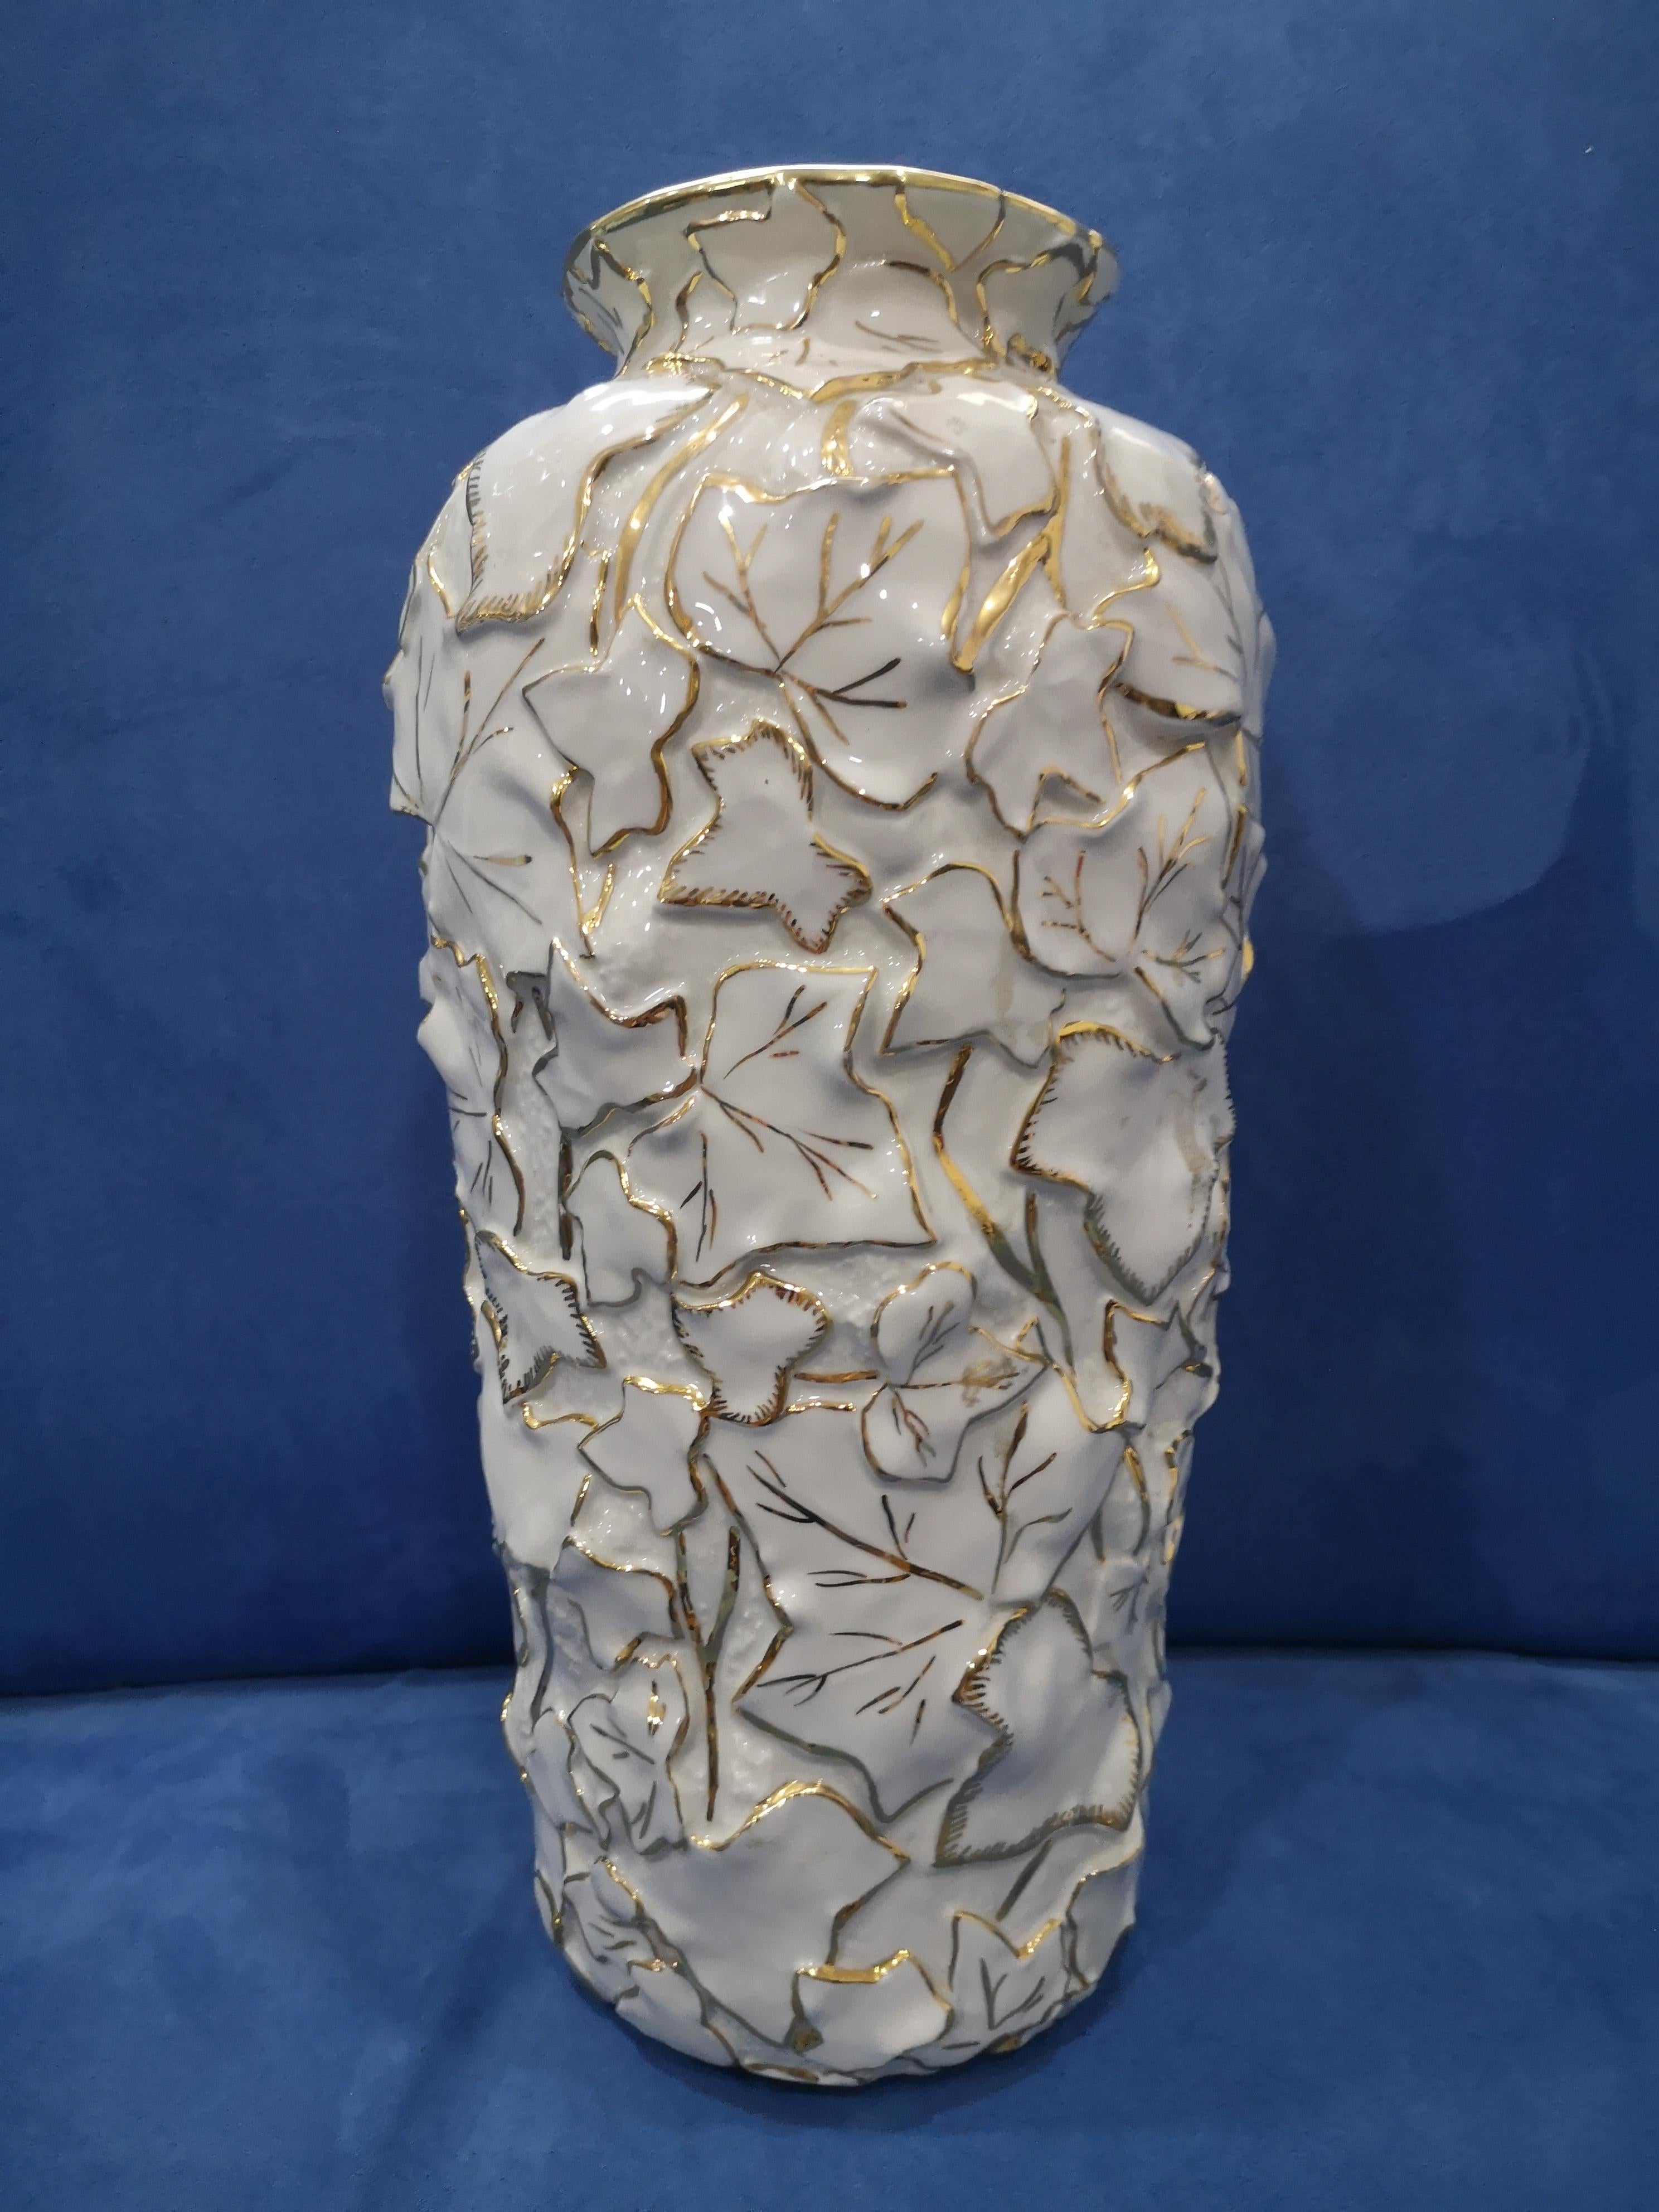 White porcelain vase by Cesare Villari hand painted with ivy leaves and pure gold decorations from the 70s in excellent condition as shown in the photo.
the vase measures:
height 38 cm
max width 20 cm
width at the base 14